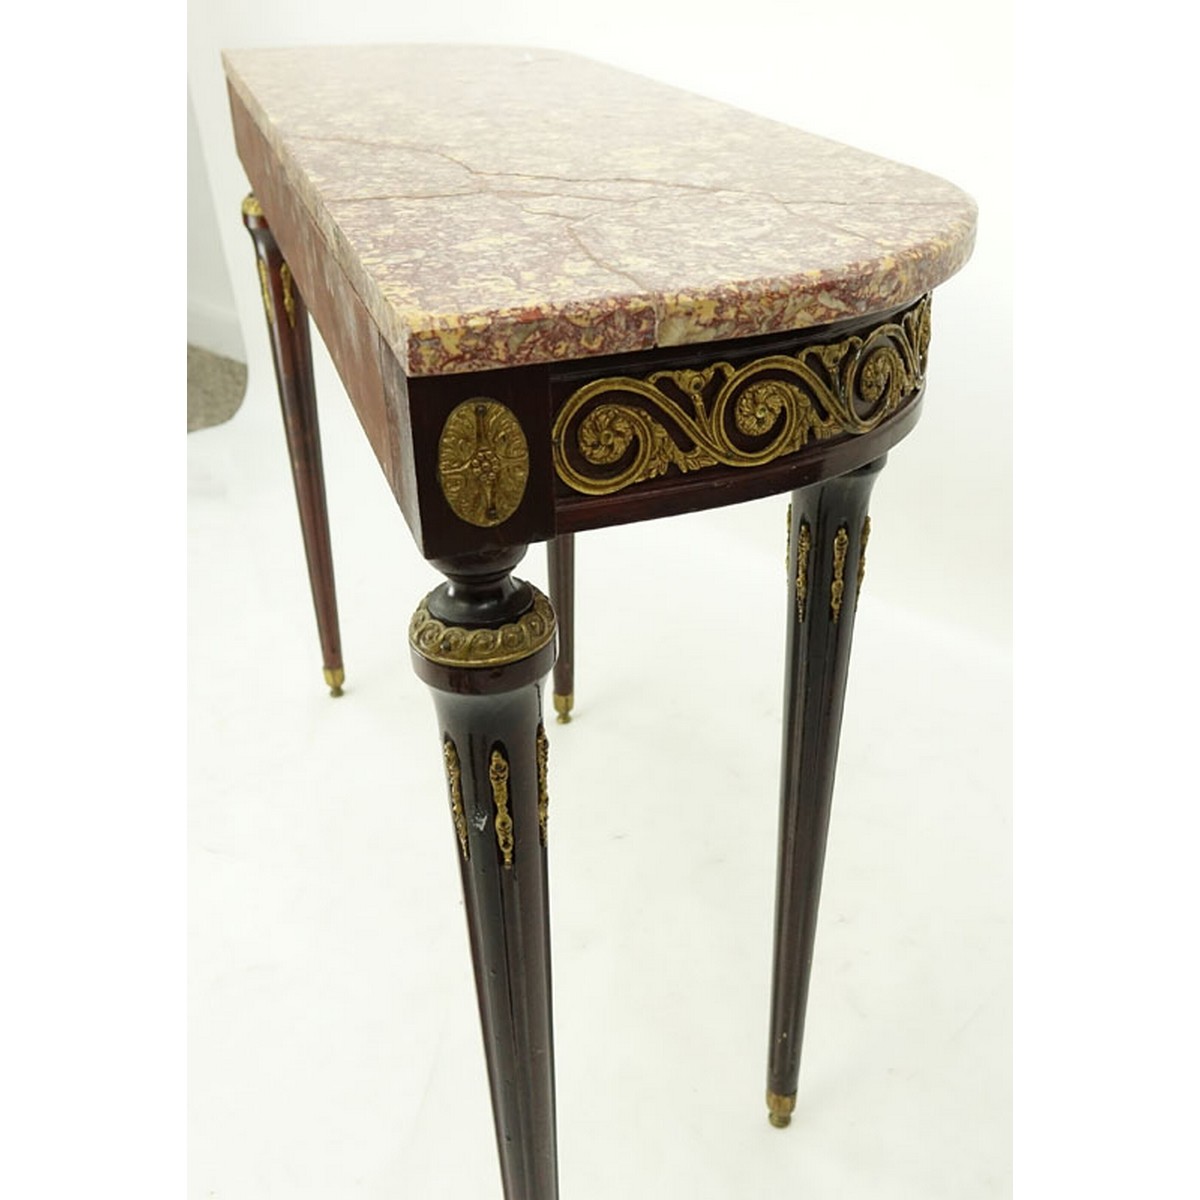 20th Century Louis XVI Style Gilt Bronze Mounted, Marble Top Console Table. Professional restoration to marble top, light scuffs to wood.